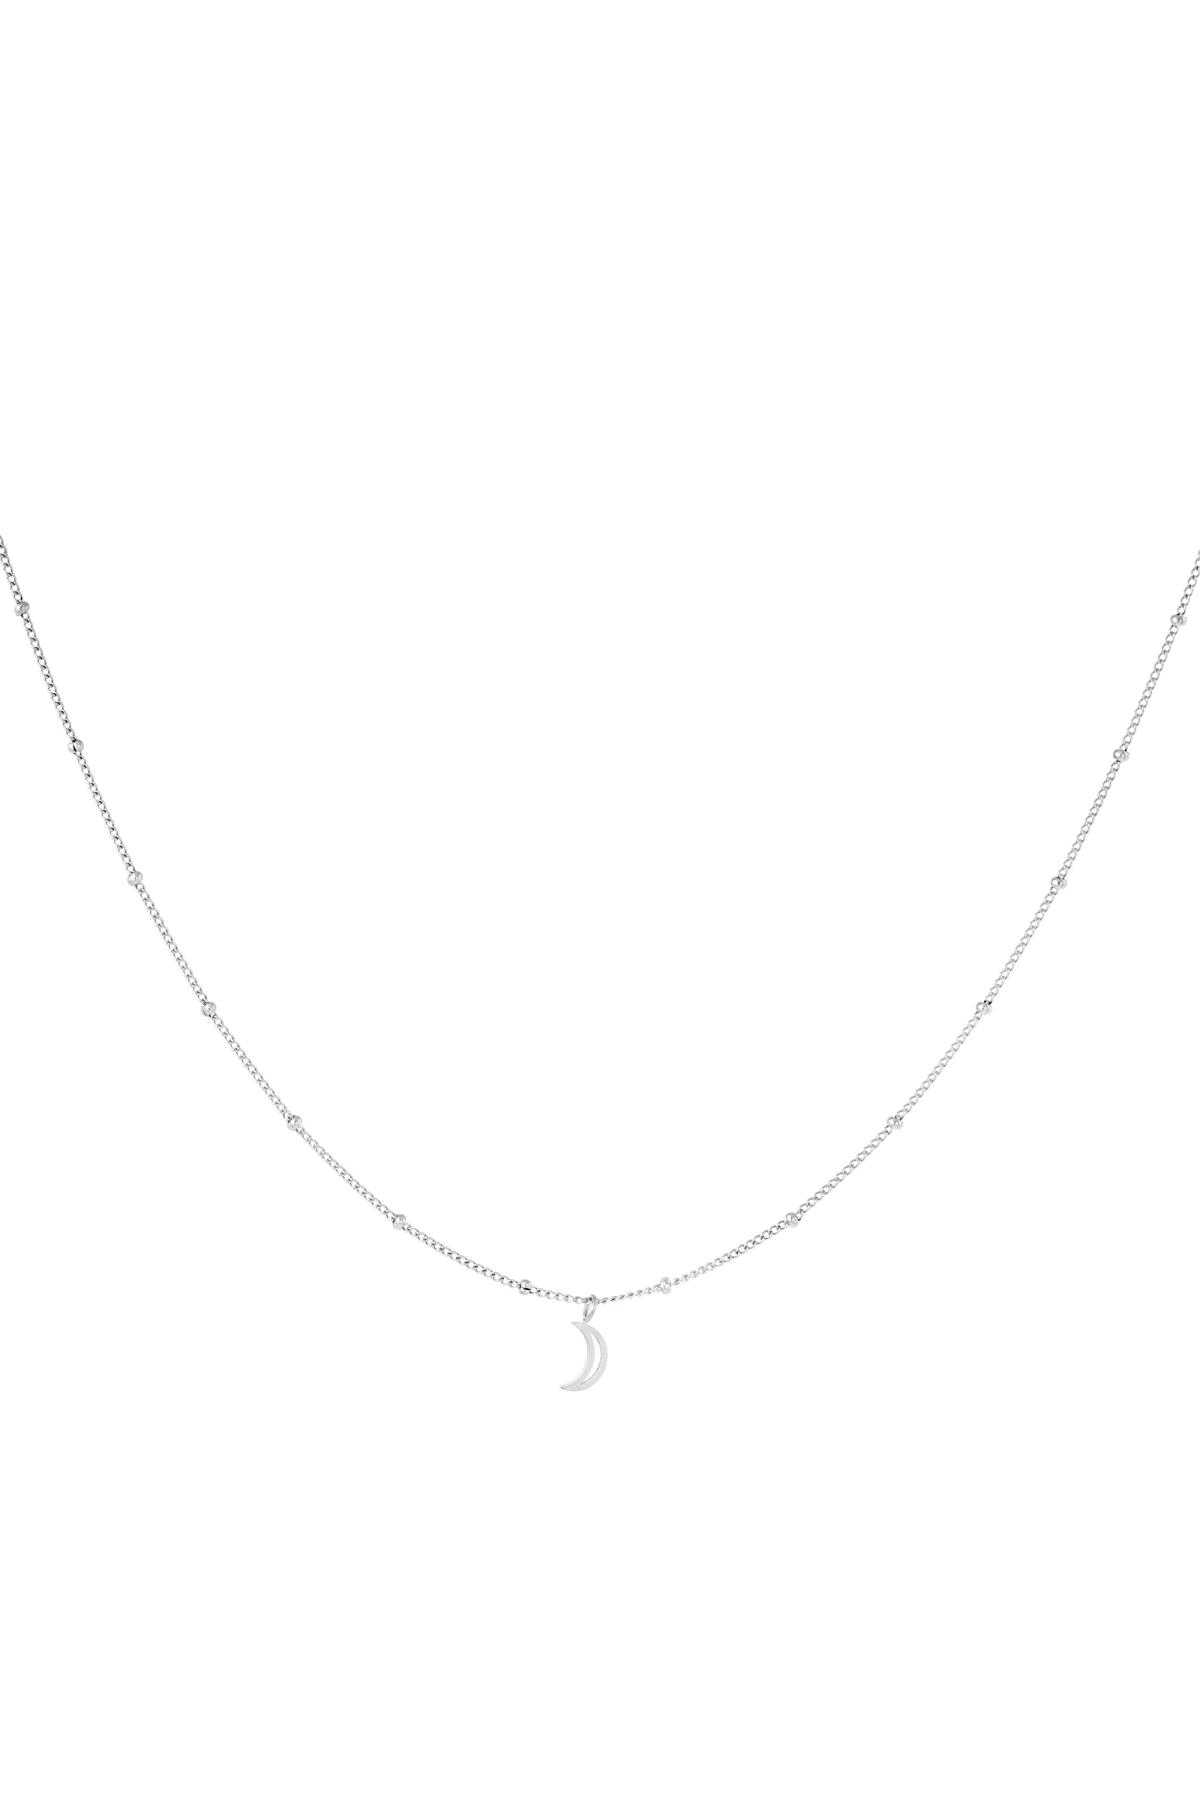 Minimalistic necklace open moon Silver Stainless Steel